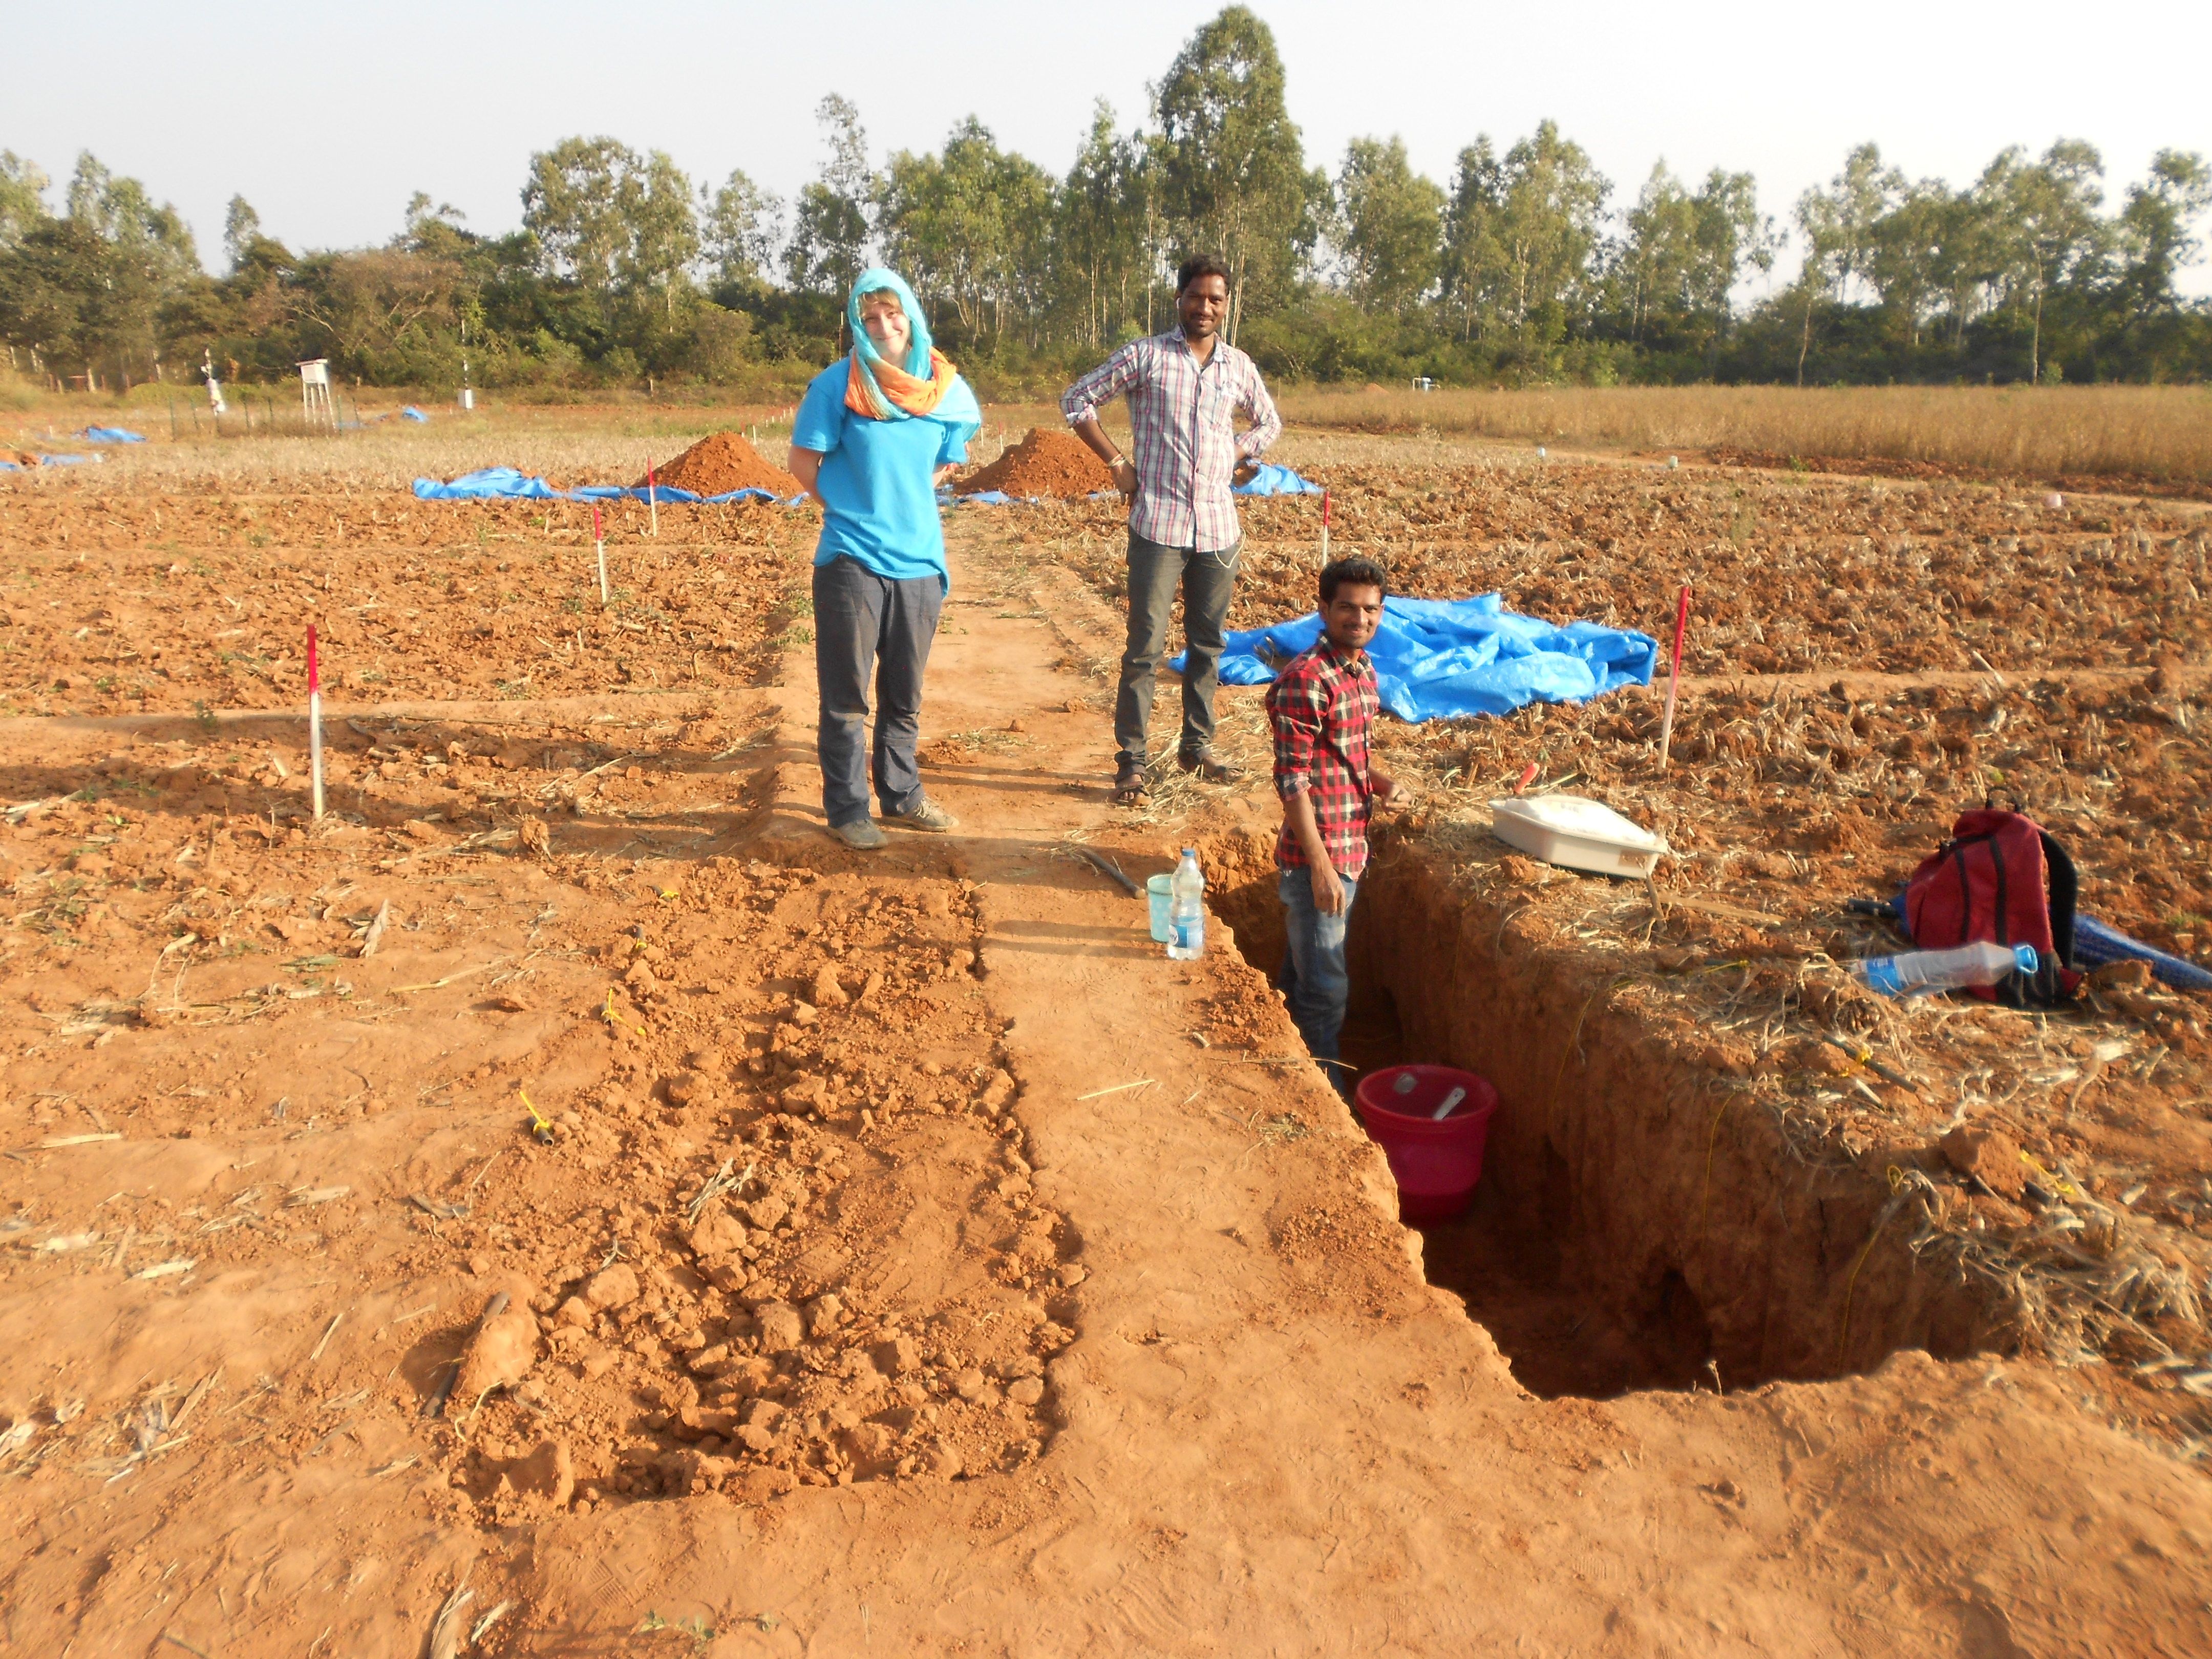 Field preparations in the Irrigated Experiment. Left: Installation of underground resin cartridges to measure leaching losses of nutrients. Persons from left to right: Research technician Andrea Mock, field assistants Rajanna and Shantayyah.